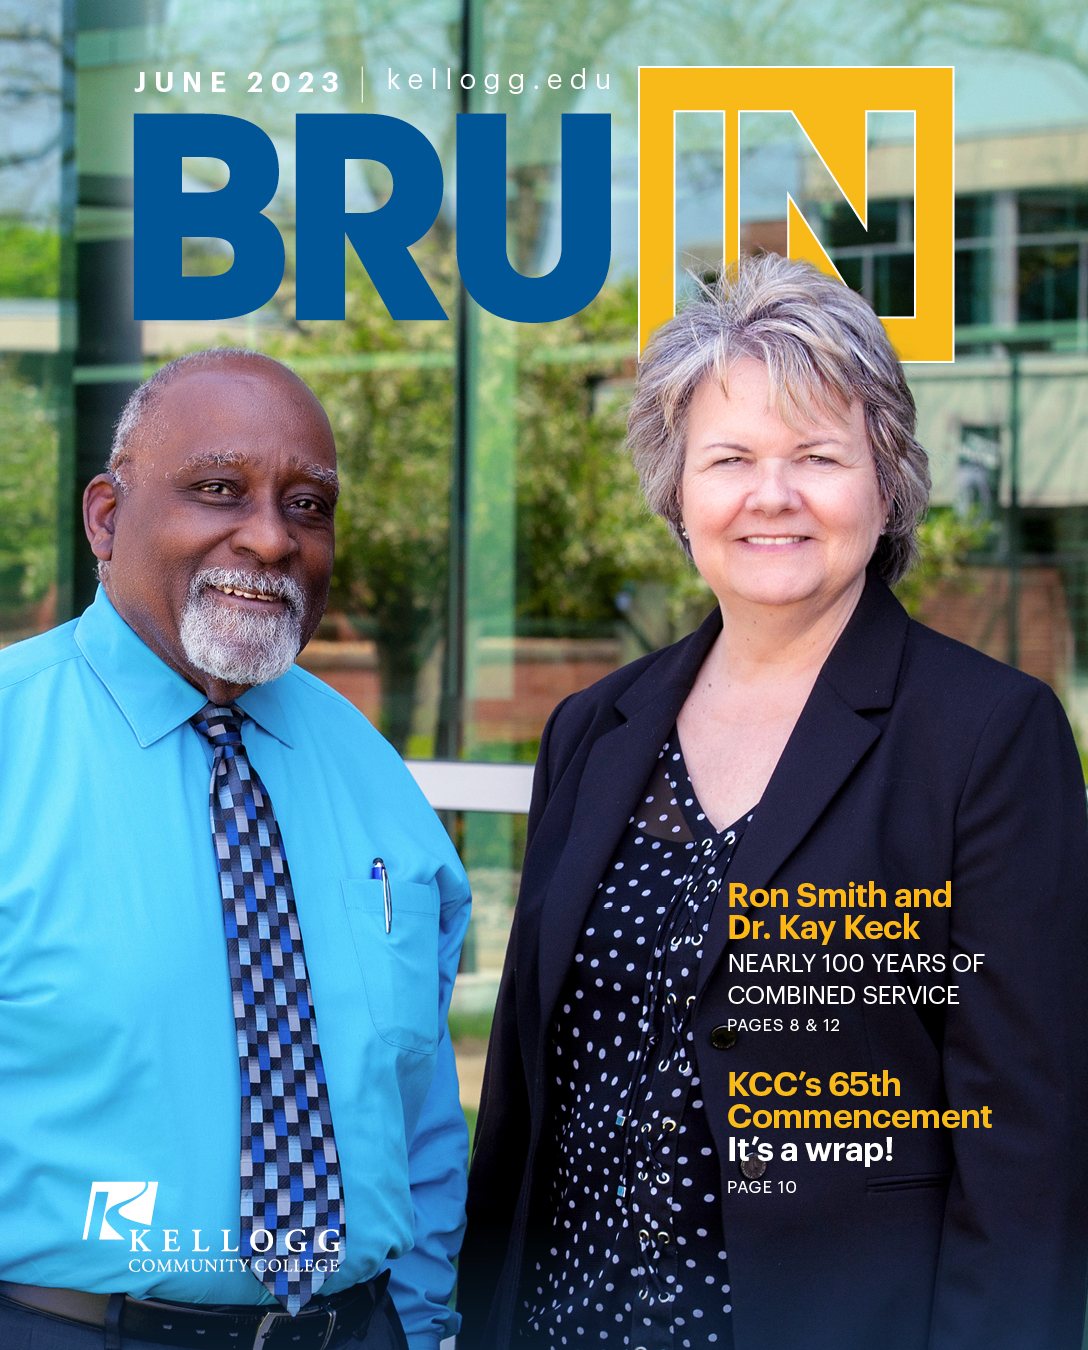 Retiring science professor Ron Smith and vice president Dr. Kay Keck are featured on the cover of the June 2023 BruIN magazine.